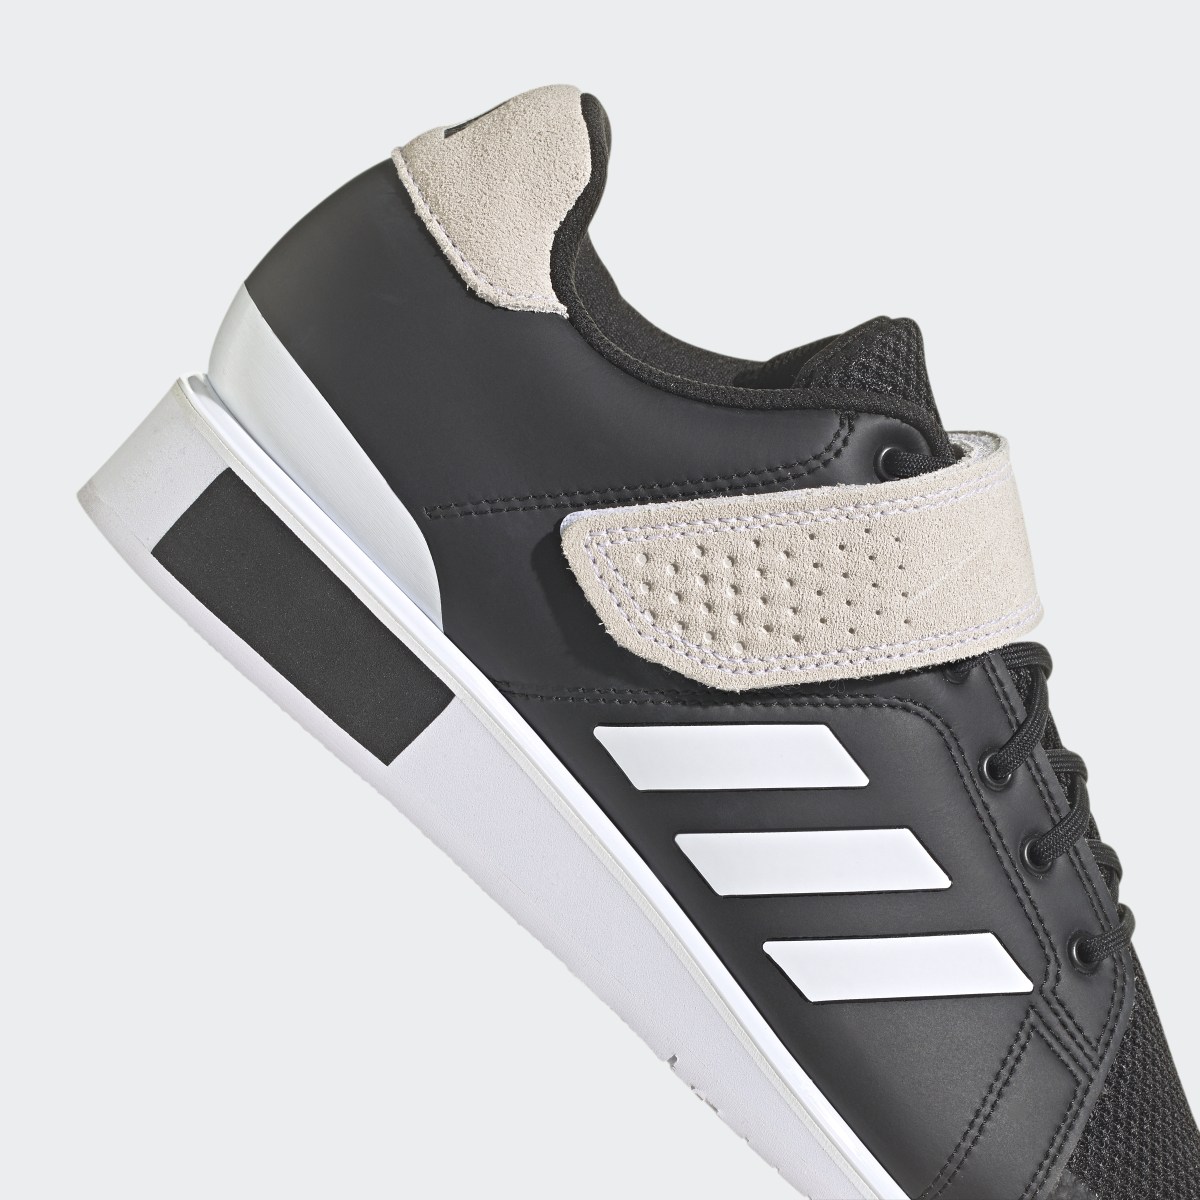 Adidas Power Perfect 3 Tokyo Weightlifting Shoes. 10